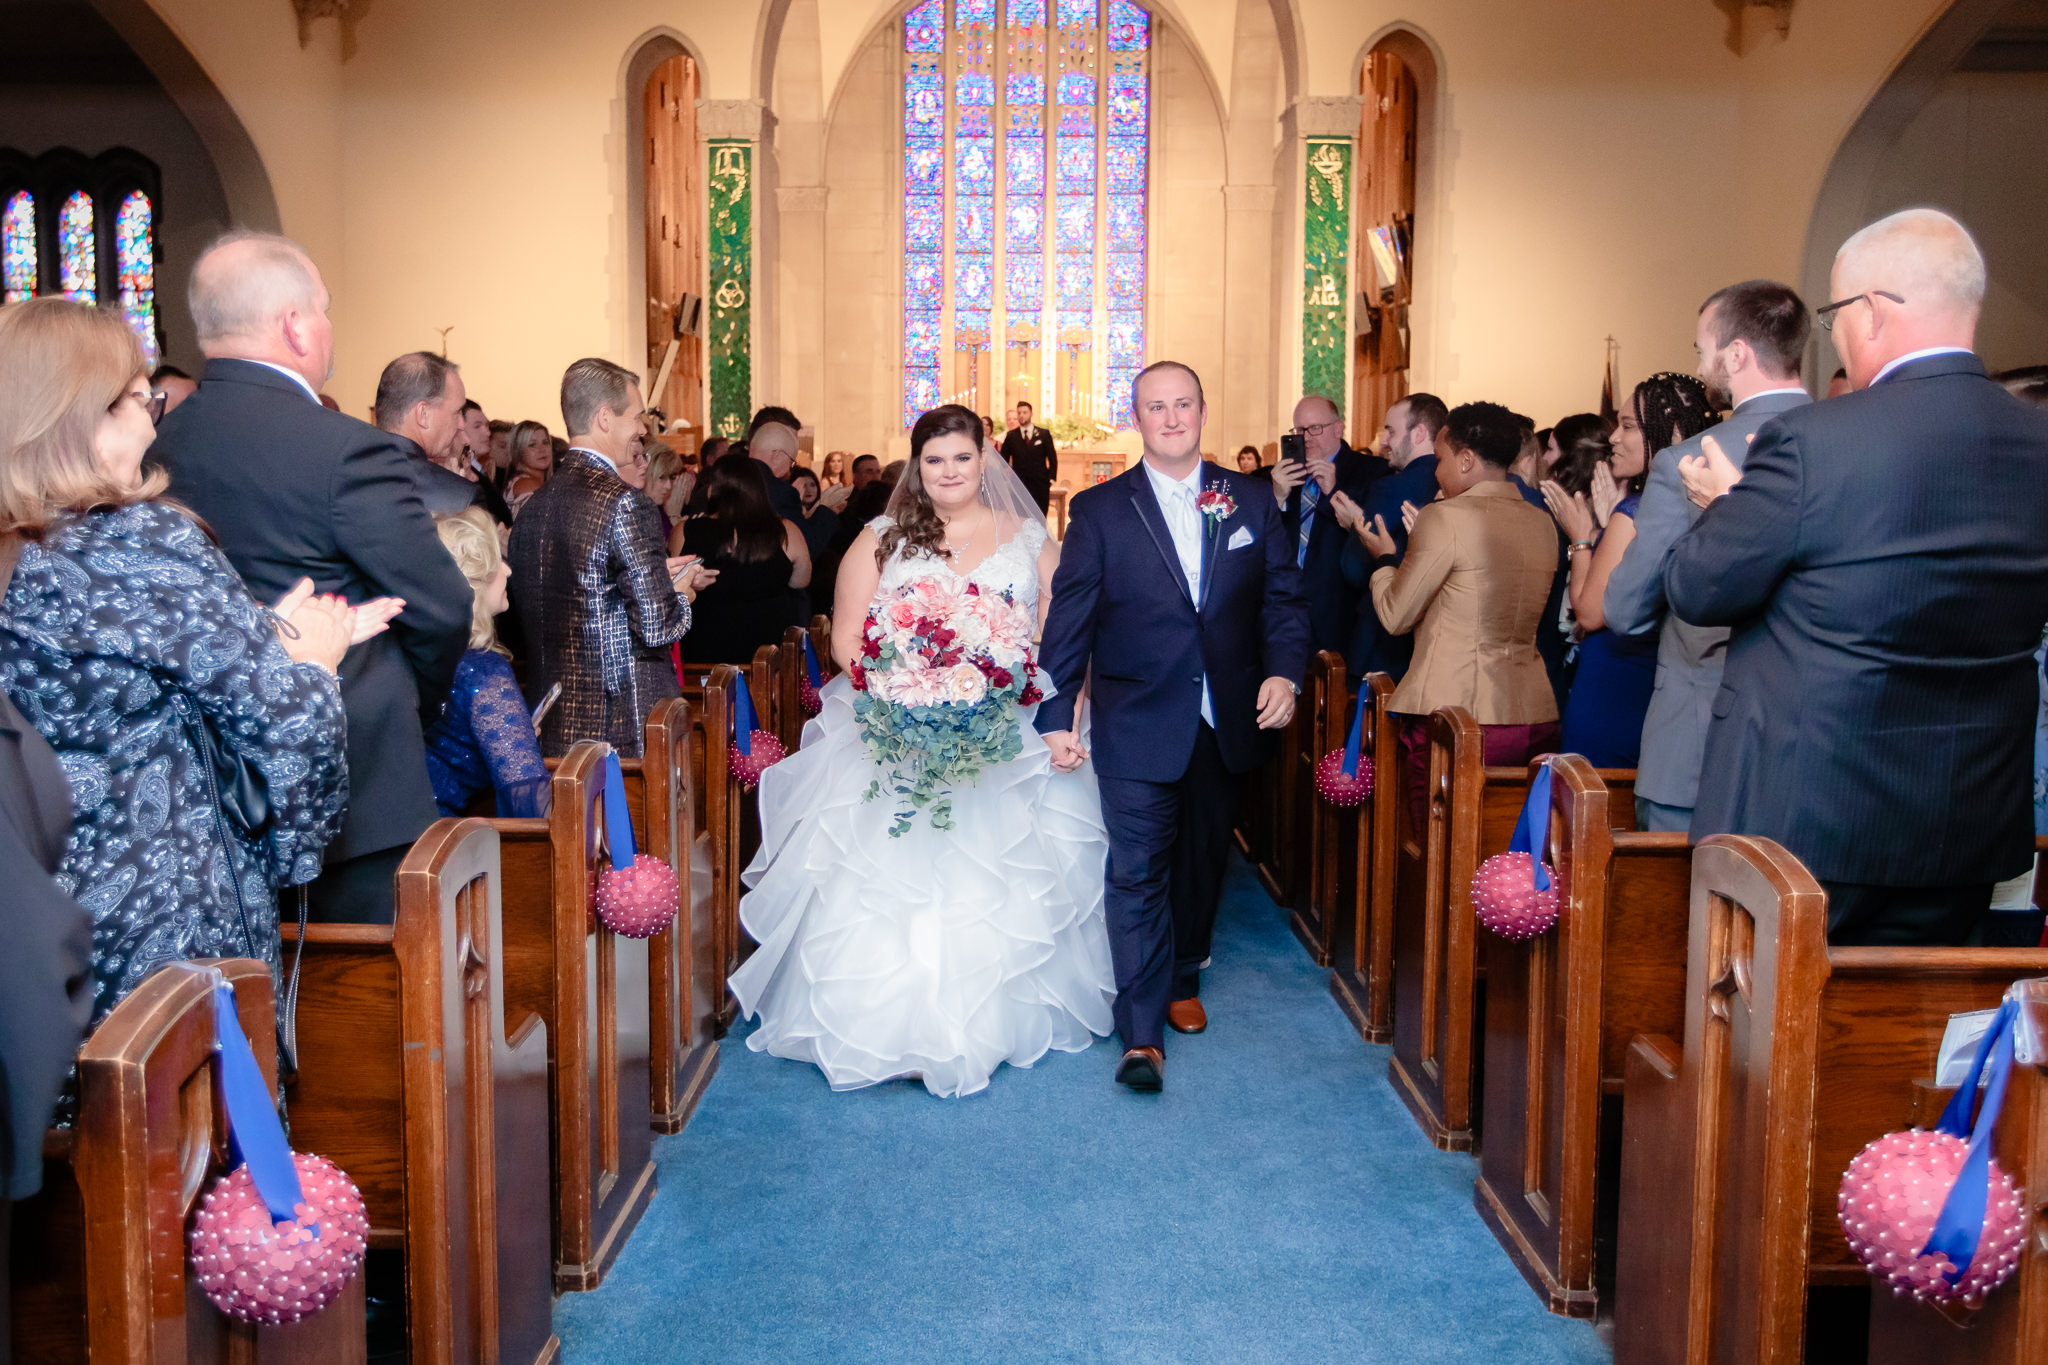 The couple walks down the aisle after being pronounced husband and wife at Mt. Lebanon United Methodist Church